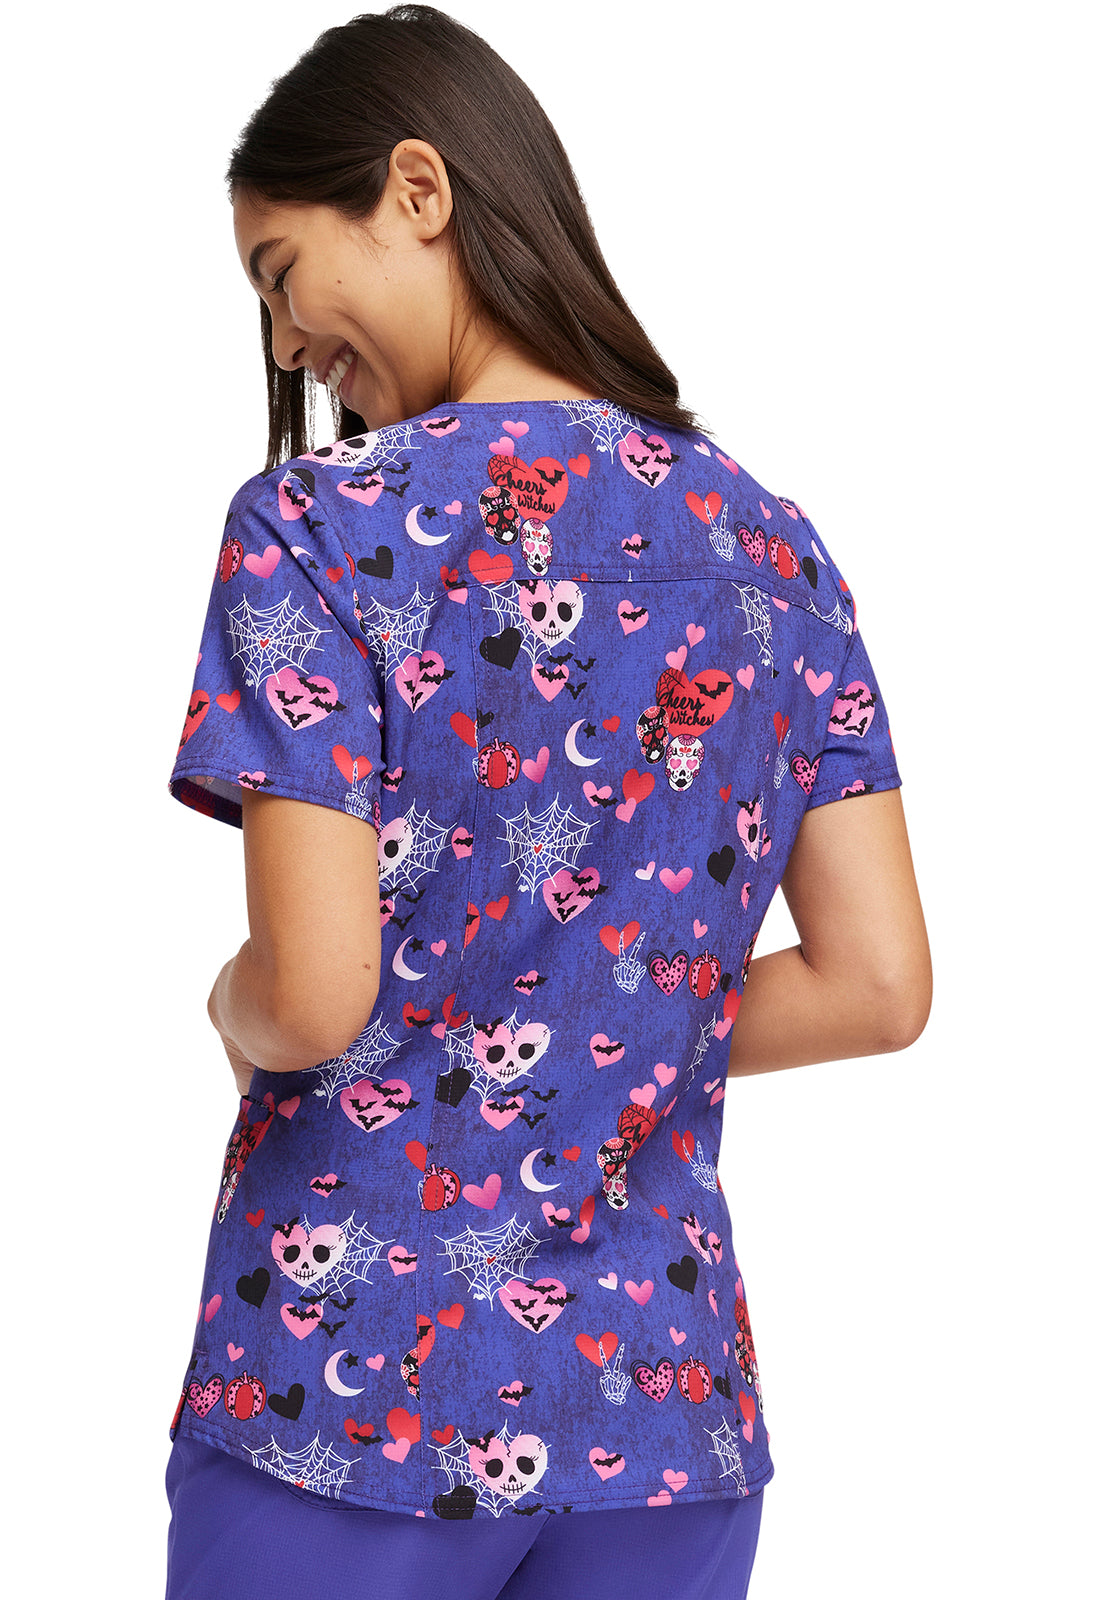 Halloween 23' -Heart & Soul Printed V-Neck Top- Cheers Witches